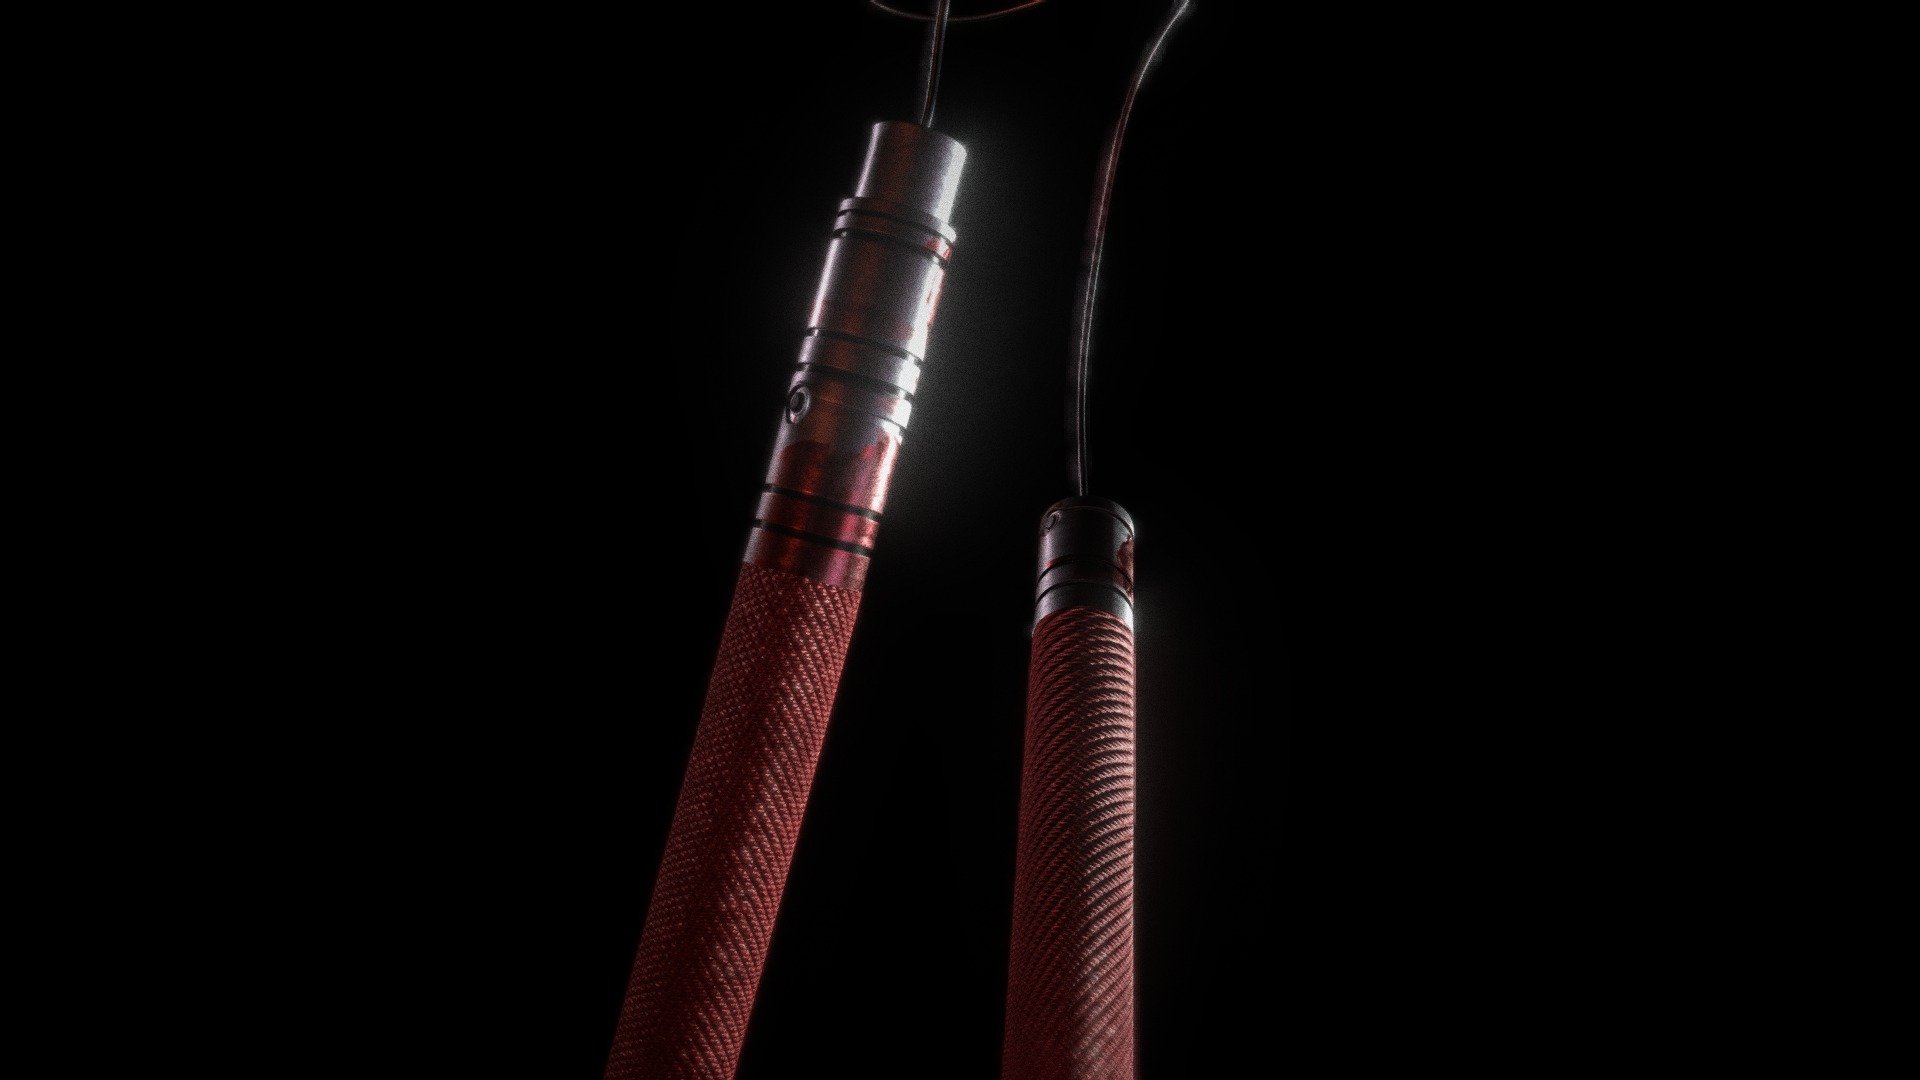 3D model made in Blender, than textured and uploaded in SubstancePainter.

This model allow me to have a first approach with Substance; needless to say, i've had spent really funny hours on It! 
 - Daredevil's BillyClub Weapon - Netflix version - Buy Royalty Free 3D model by Mario Falasca (@marfal) 3d model